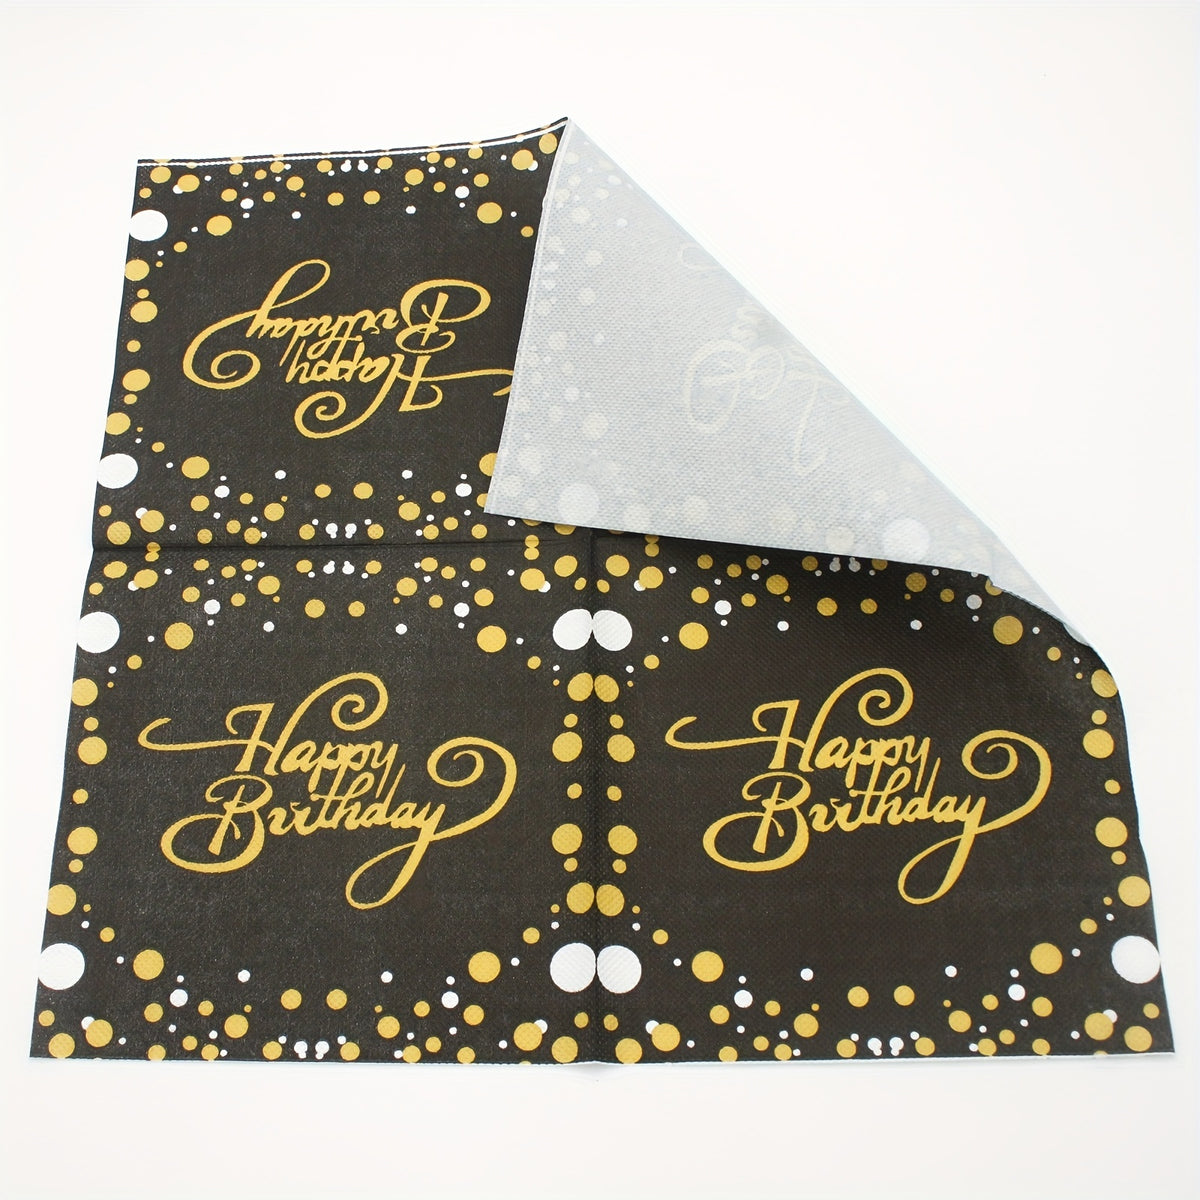 a black and gold birthday napkin with happy birthday written on it